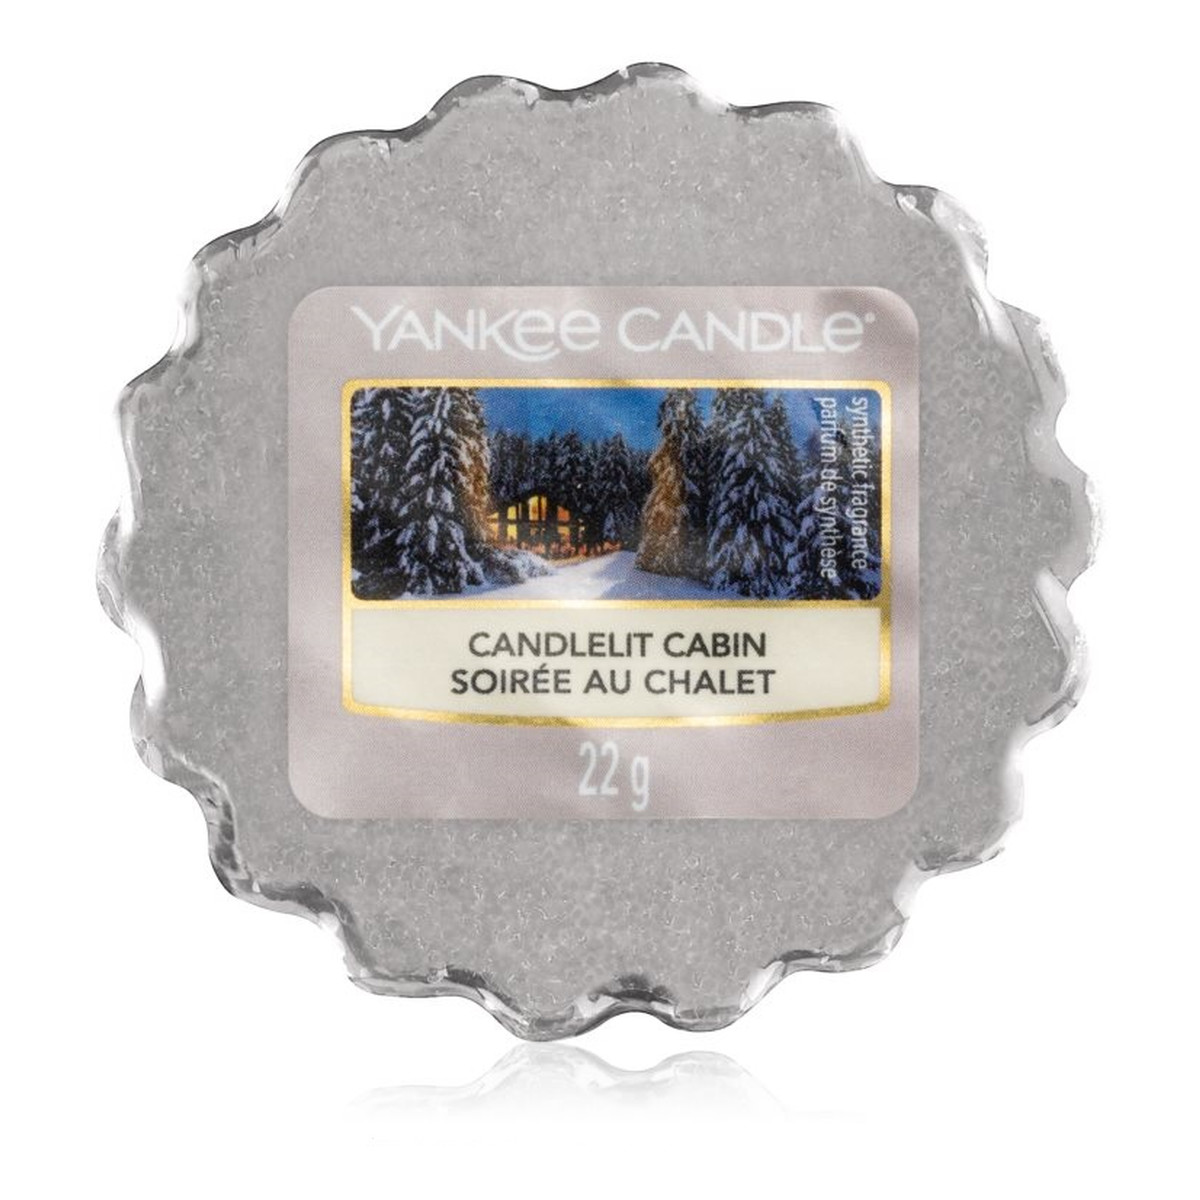 Yankee Candle Wax wosk zapachowy candlelit cabin 22g